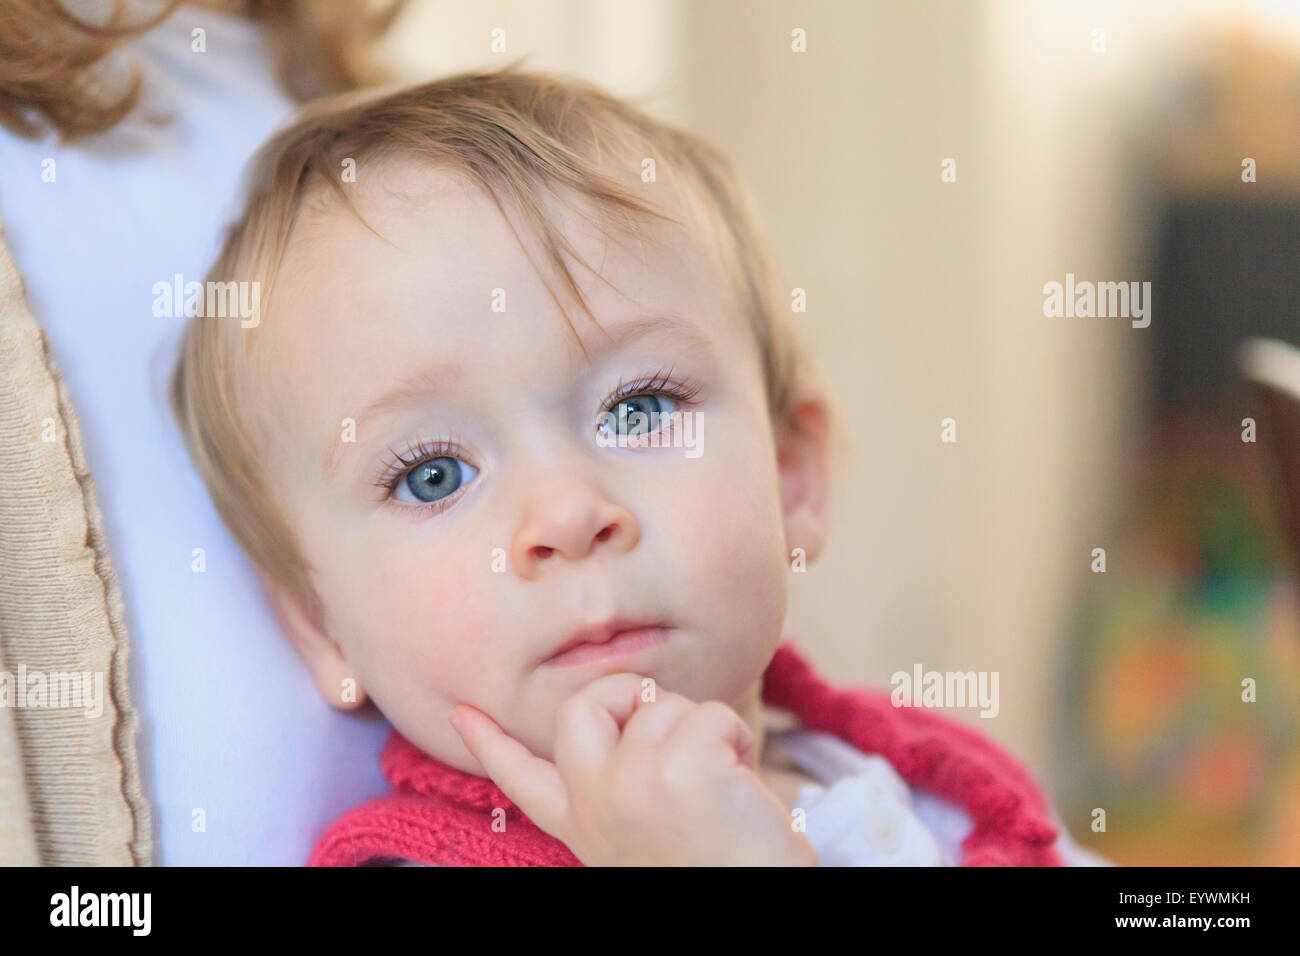 Portrait of a pensive baby girl Stock Photo